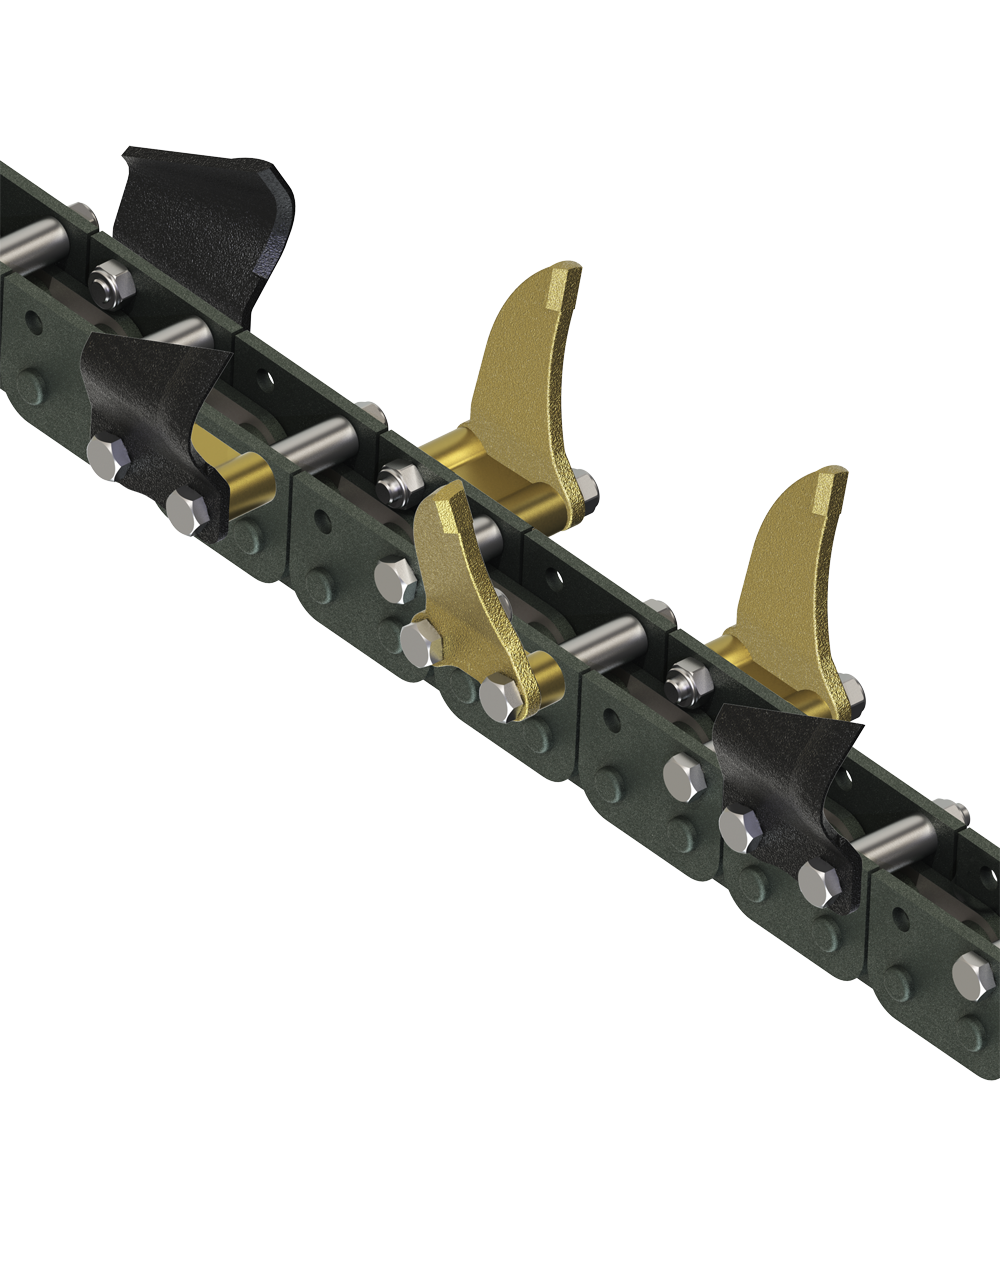 Trencher Chain - Combination